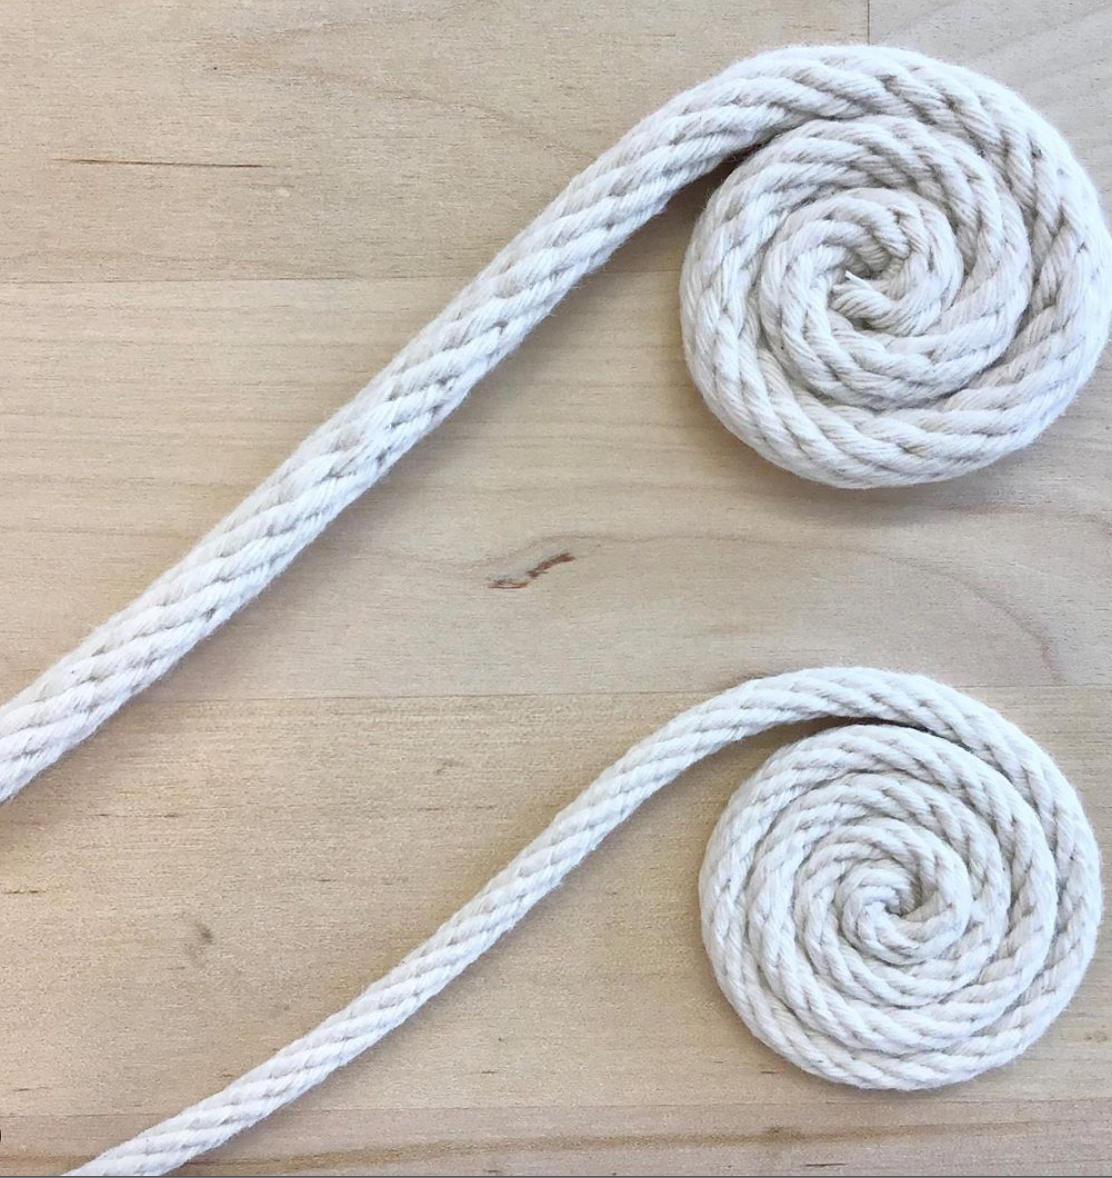 Rope Sample Set - 3/16 Rope and 5/16 Rope - 1 Yard Samples — The Mountain  Thread Company (TM)